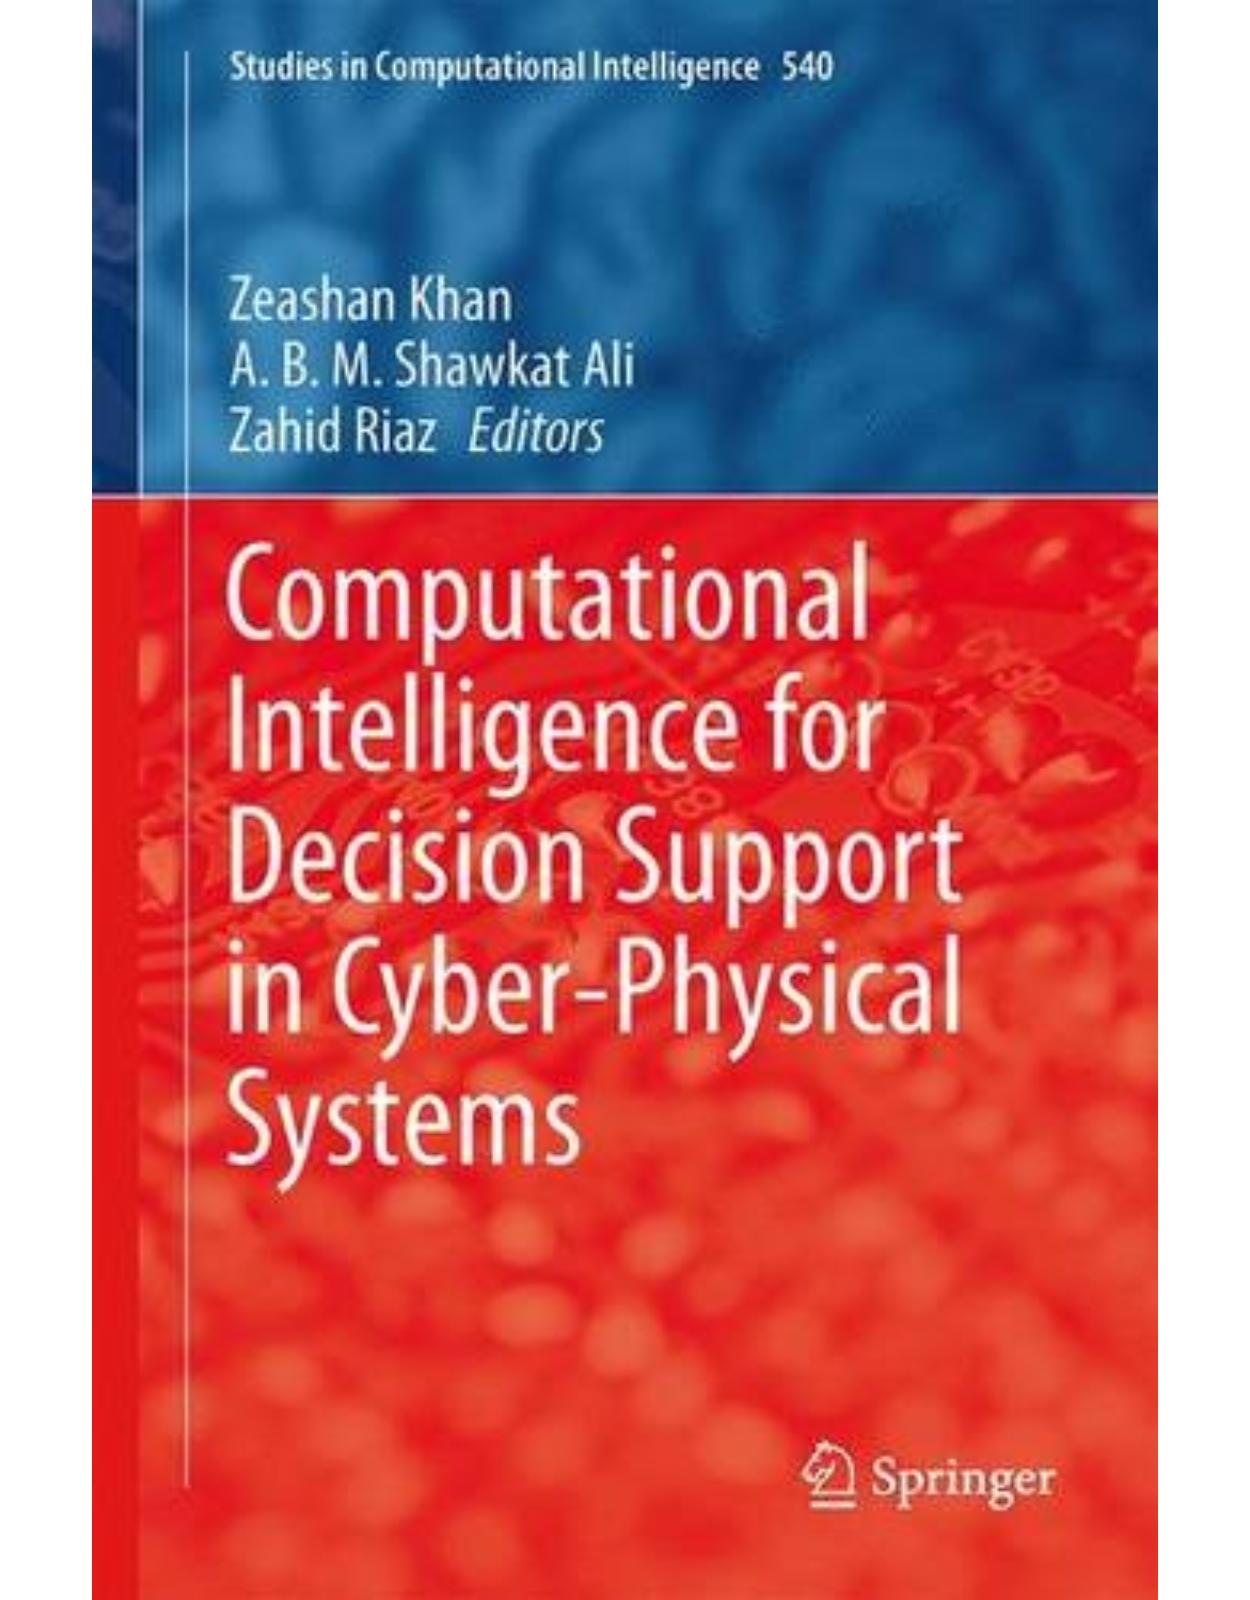 Computational Intelligence for Decision Support in CyberPhysical Systems